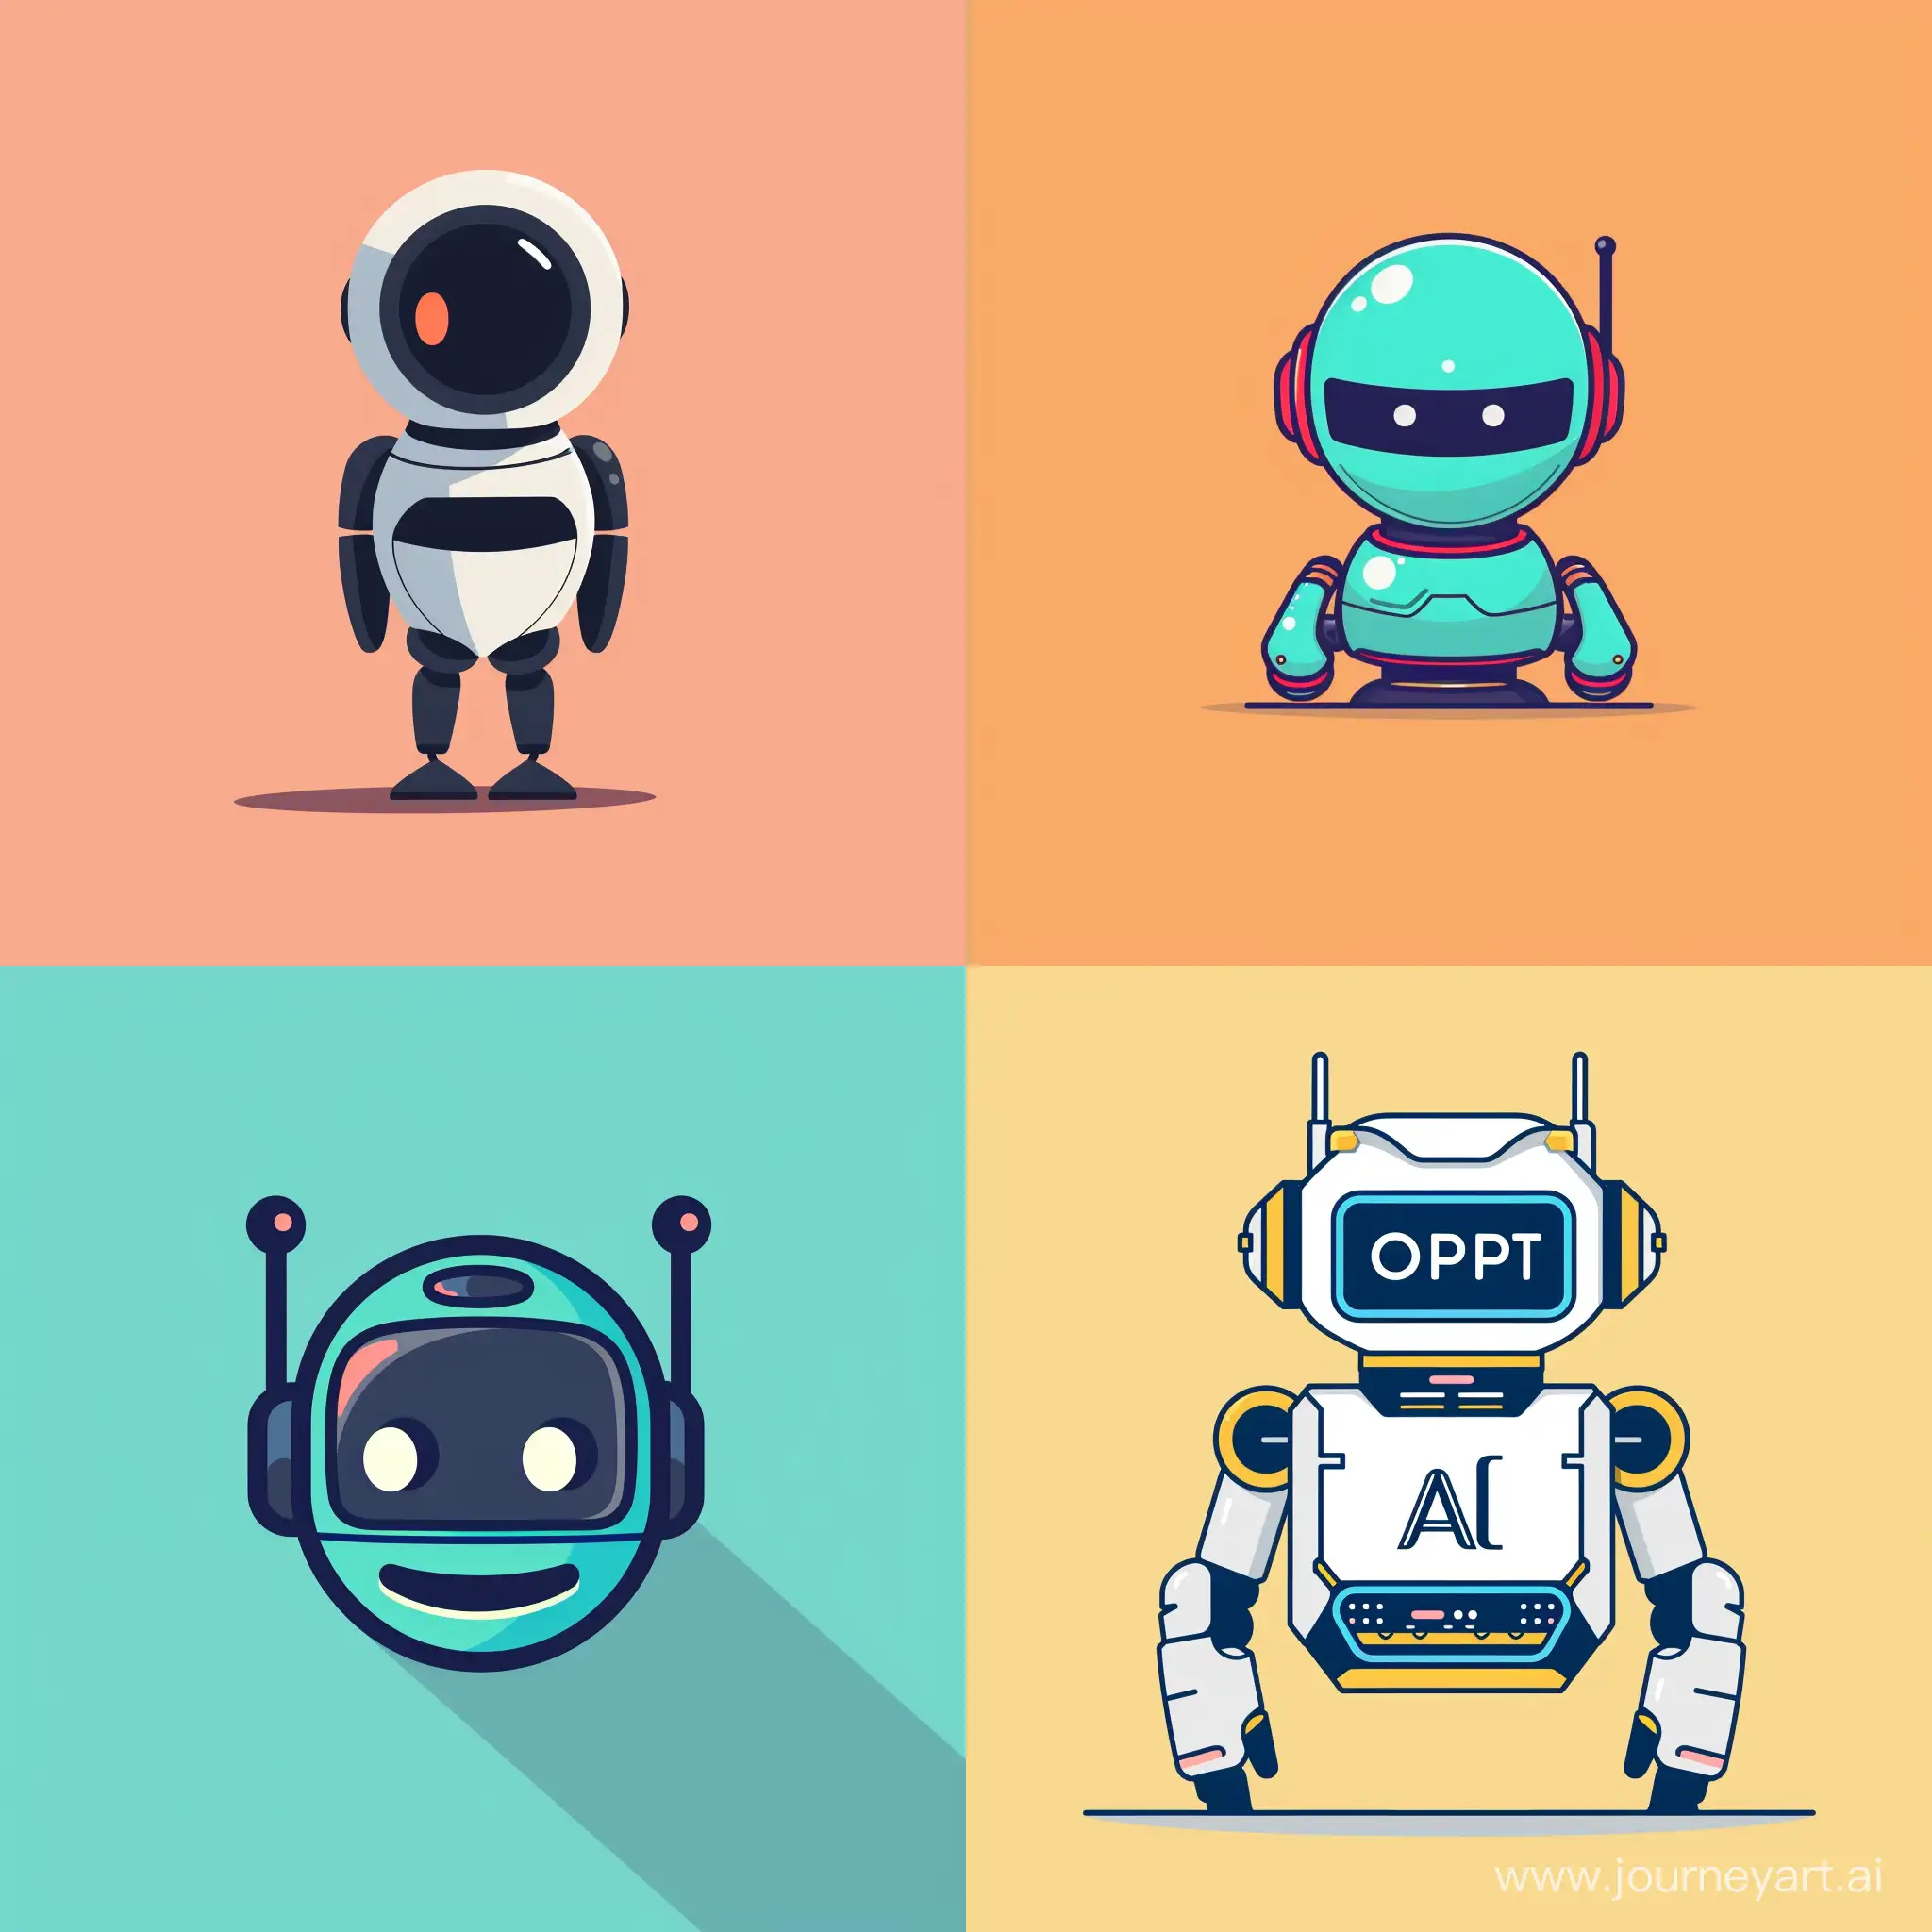 Minimal-Graphic-Illustration-of-OpenAI-ChatGPT-Chatbot-on-Plain-Color-Background